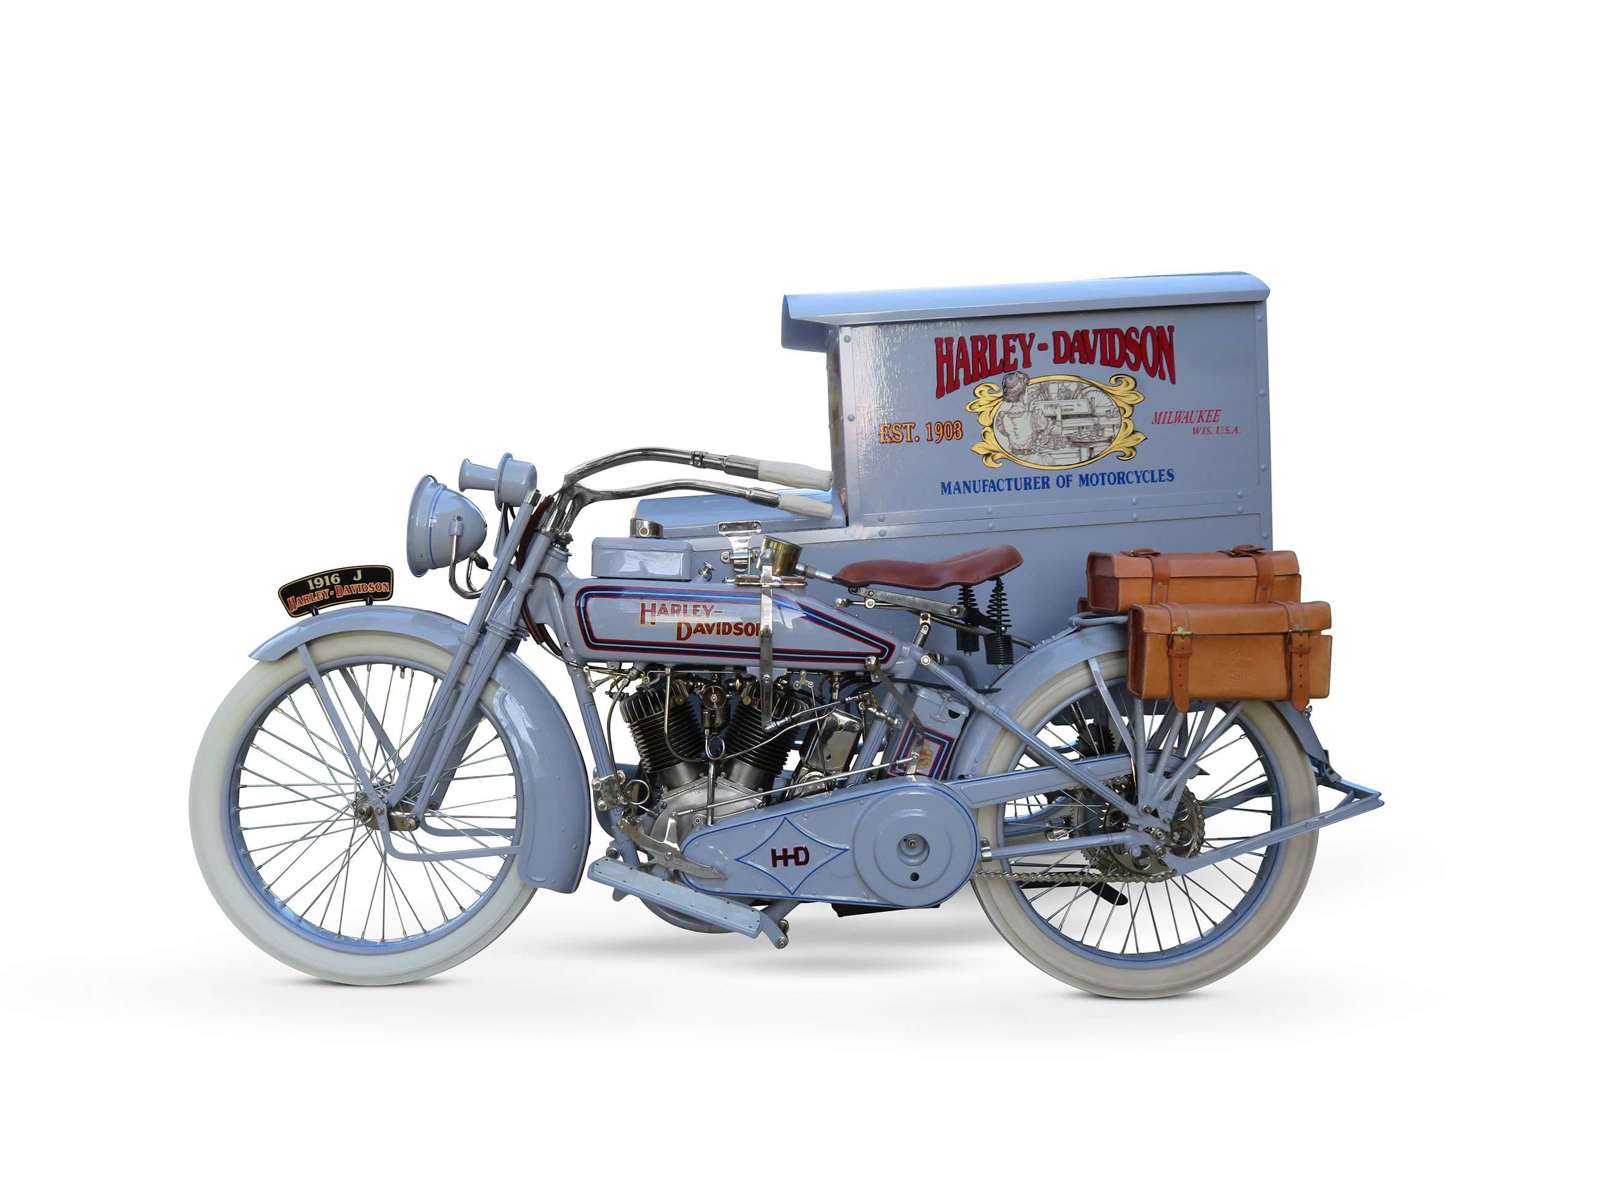 Wacky 1916 Harley Davidson Model J Package Truck To Go To Auction Grr